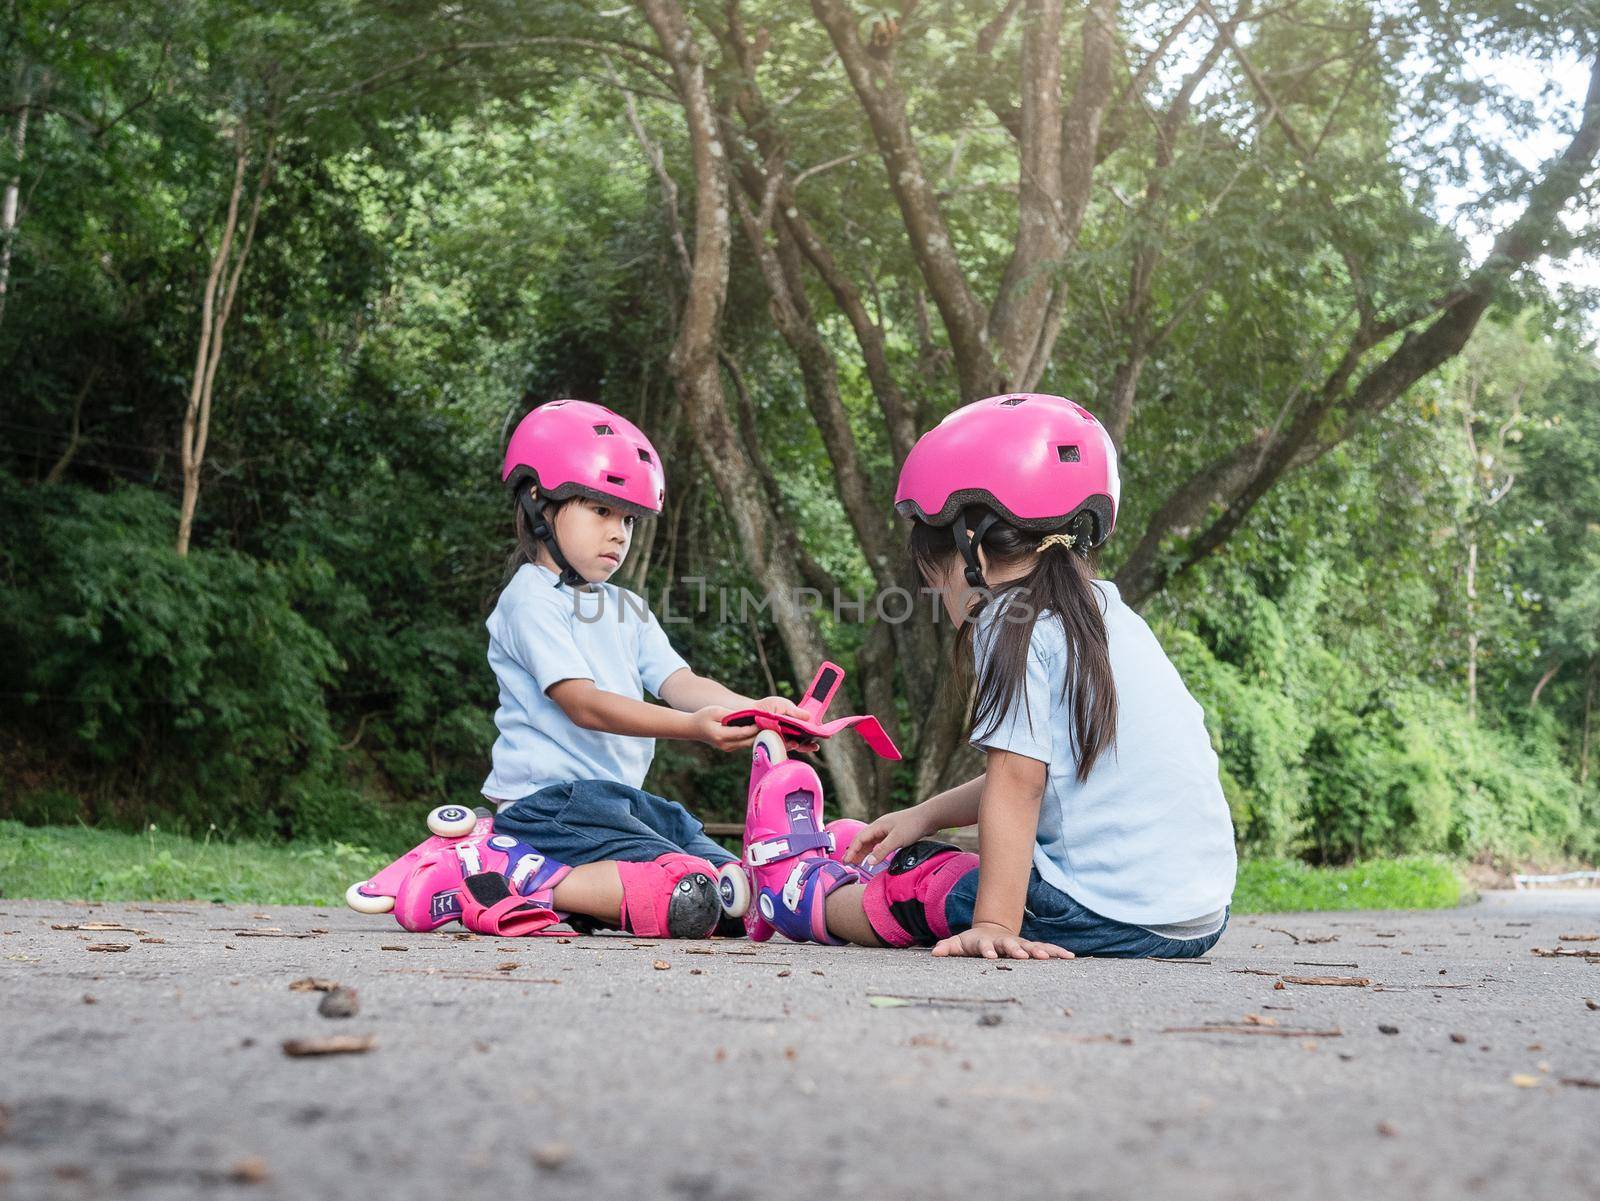 Cute older sister is helping younger sister to put on a protection pads and safety helmet practicing to roller skate on the street in the park. Active outdoor sport for kids. by TEERASAK